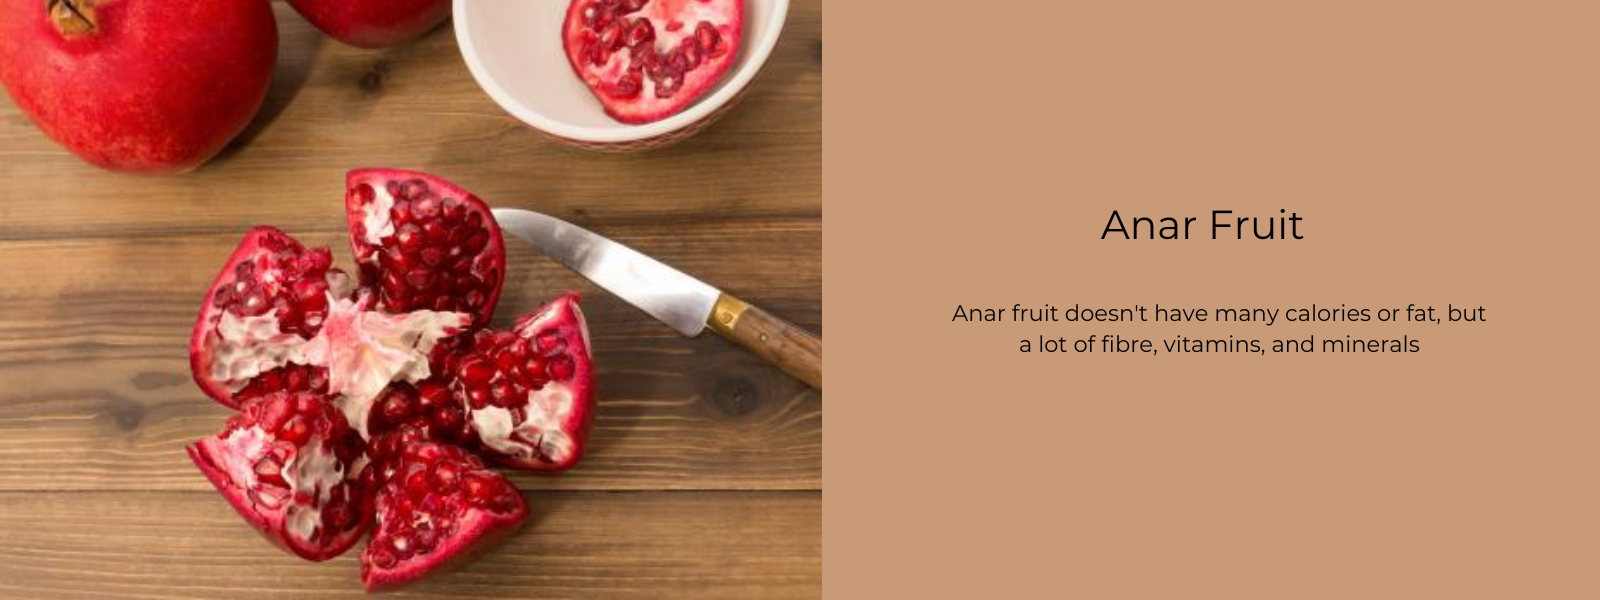 Anar Fruit - Health Benefits, Uses and Important Facts